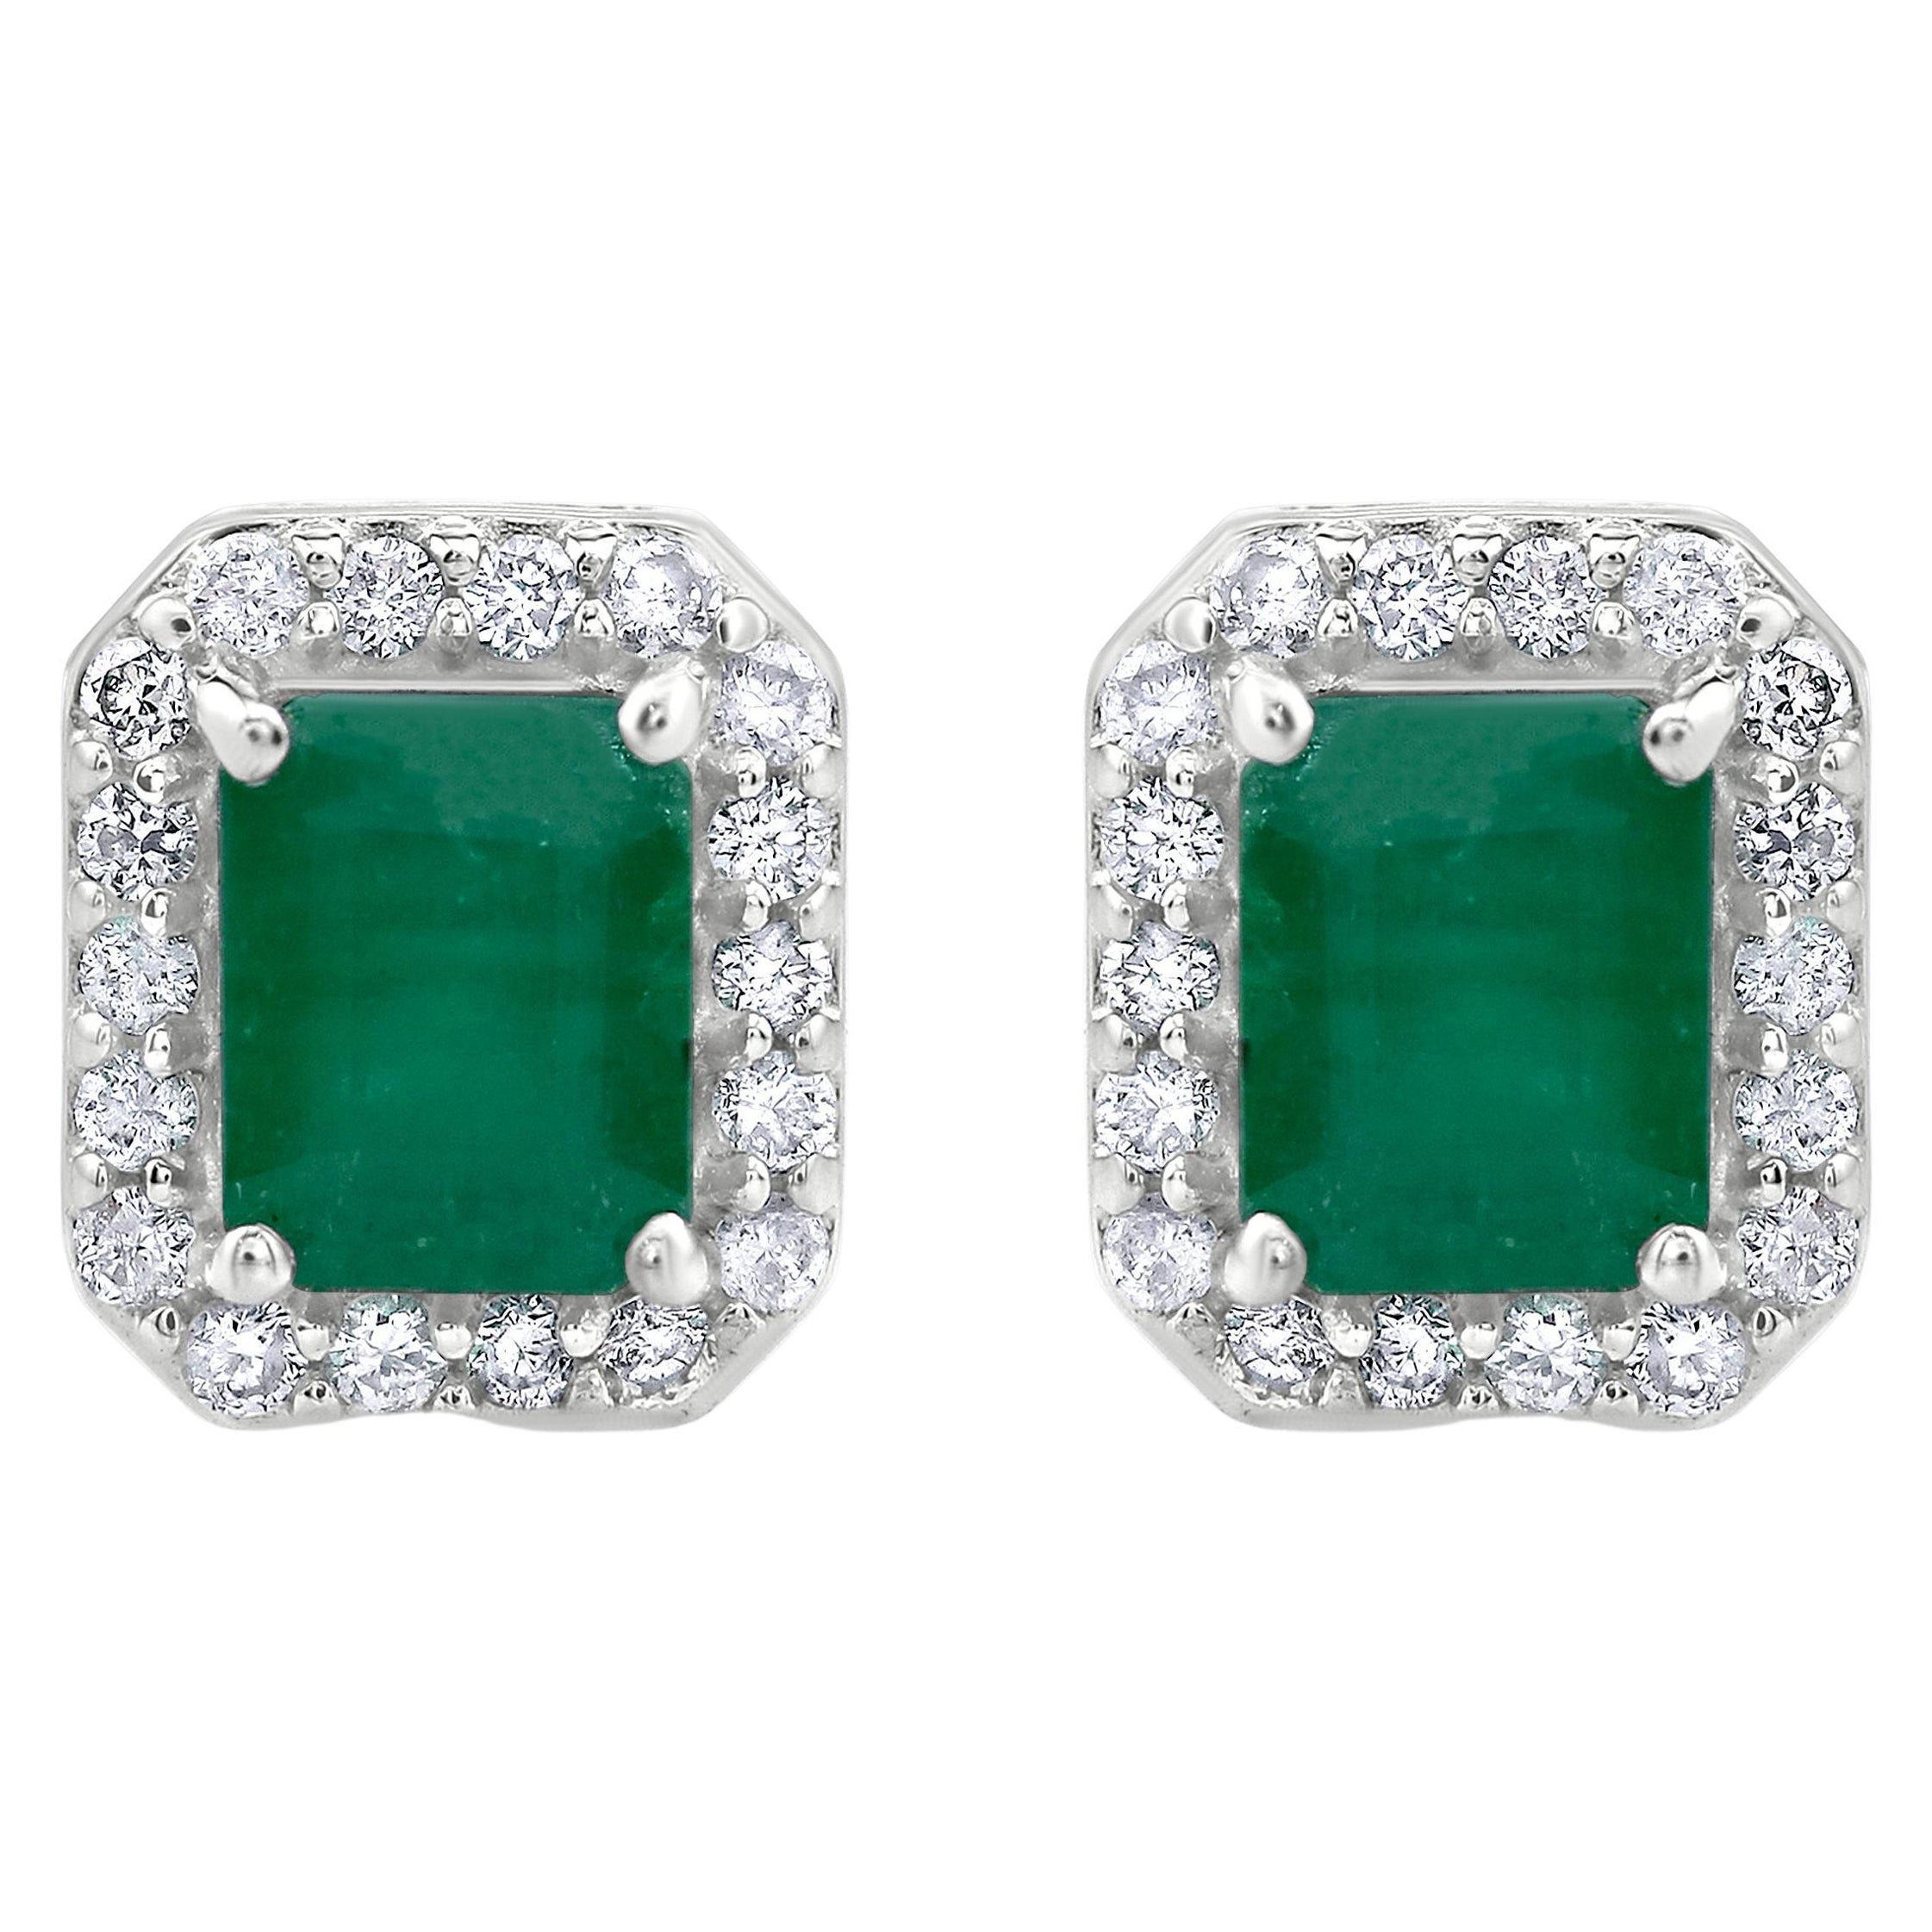 Gemistry .98 Carats Octagon Emerald Stud Earrings with Diamond in 14K White Gold